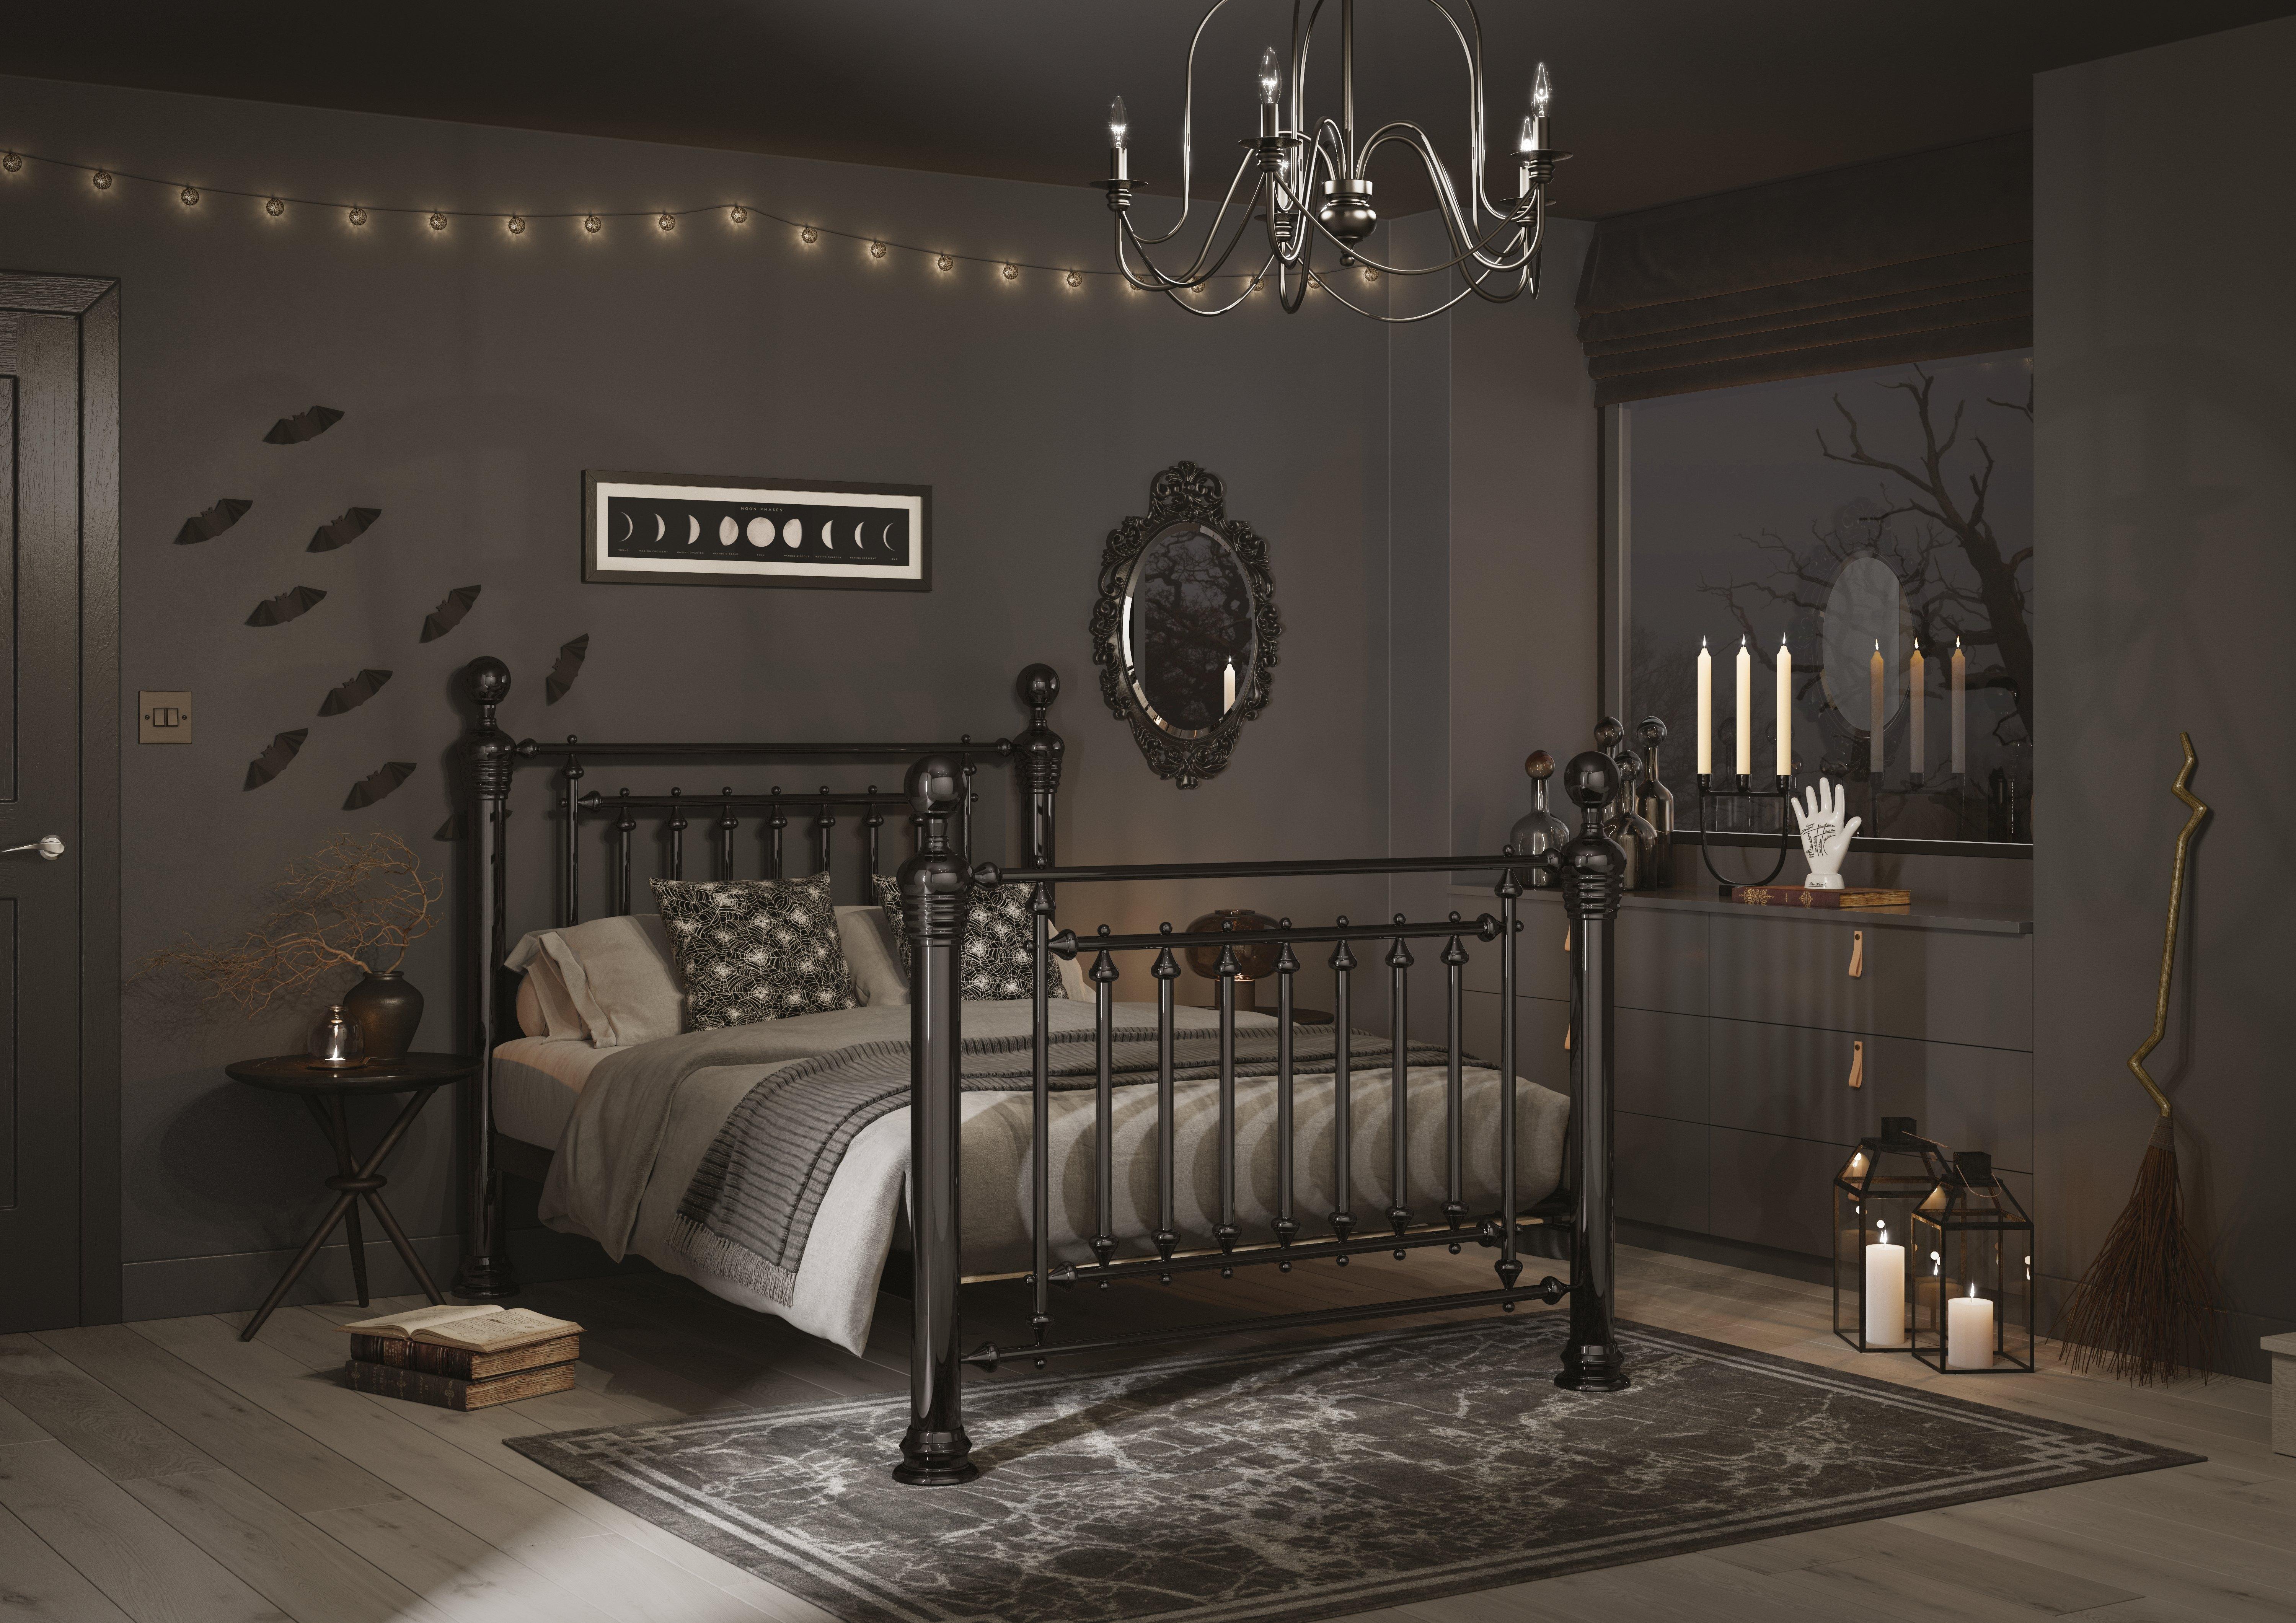 Dark and dramatic: how to style a black bedroom